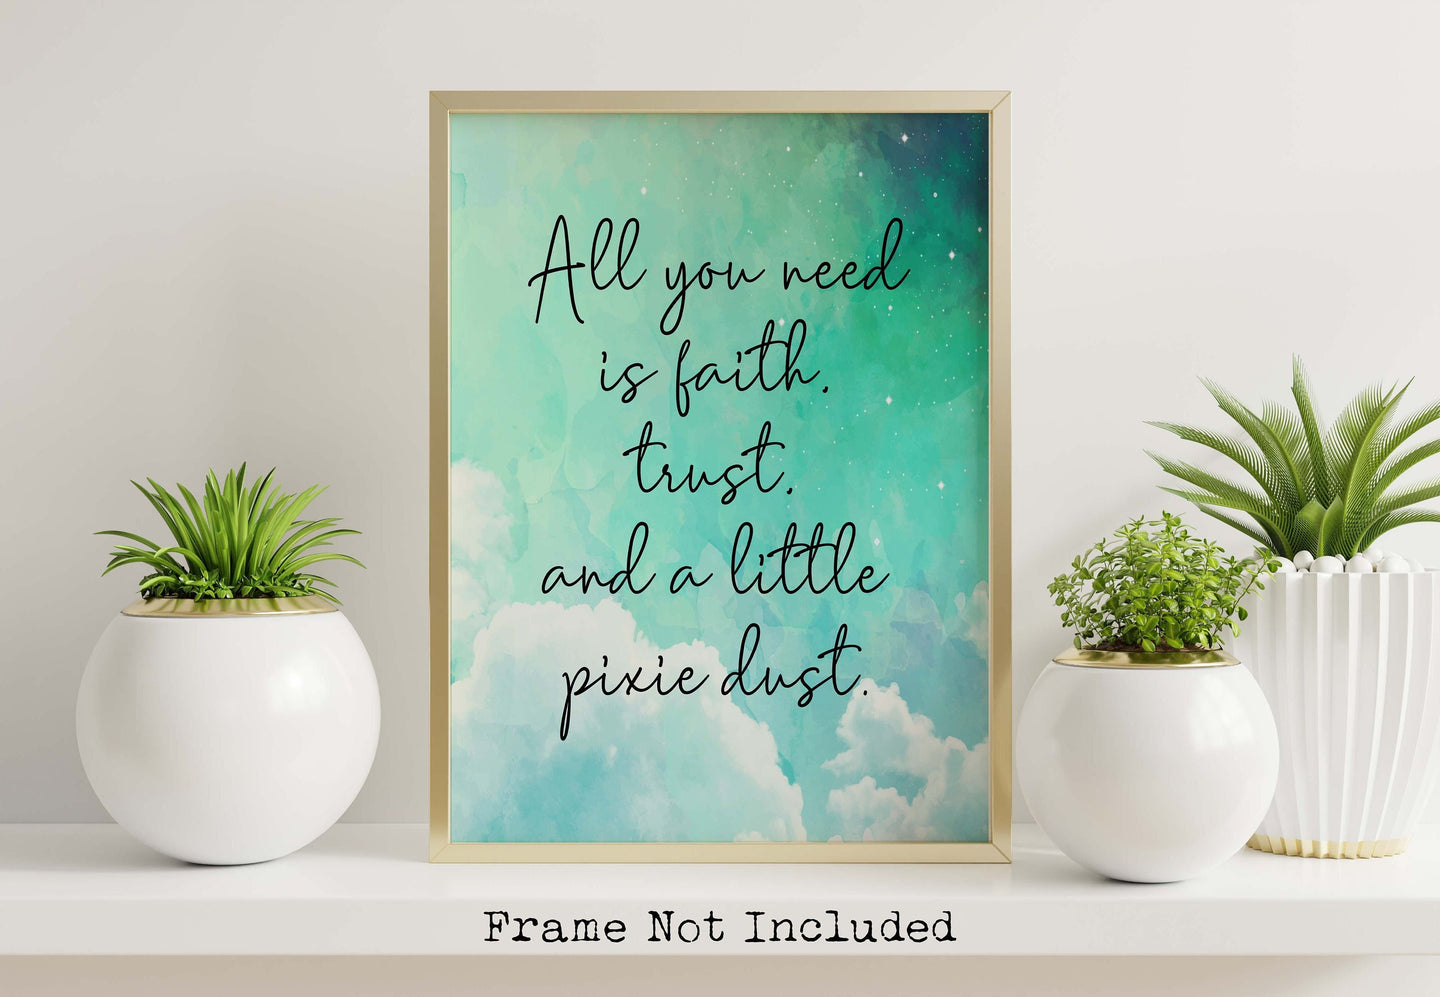 Peter Pan Print - All you need is faith, trust and a little pixie dust